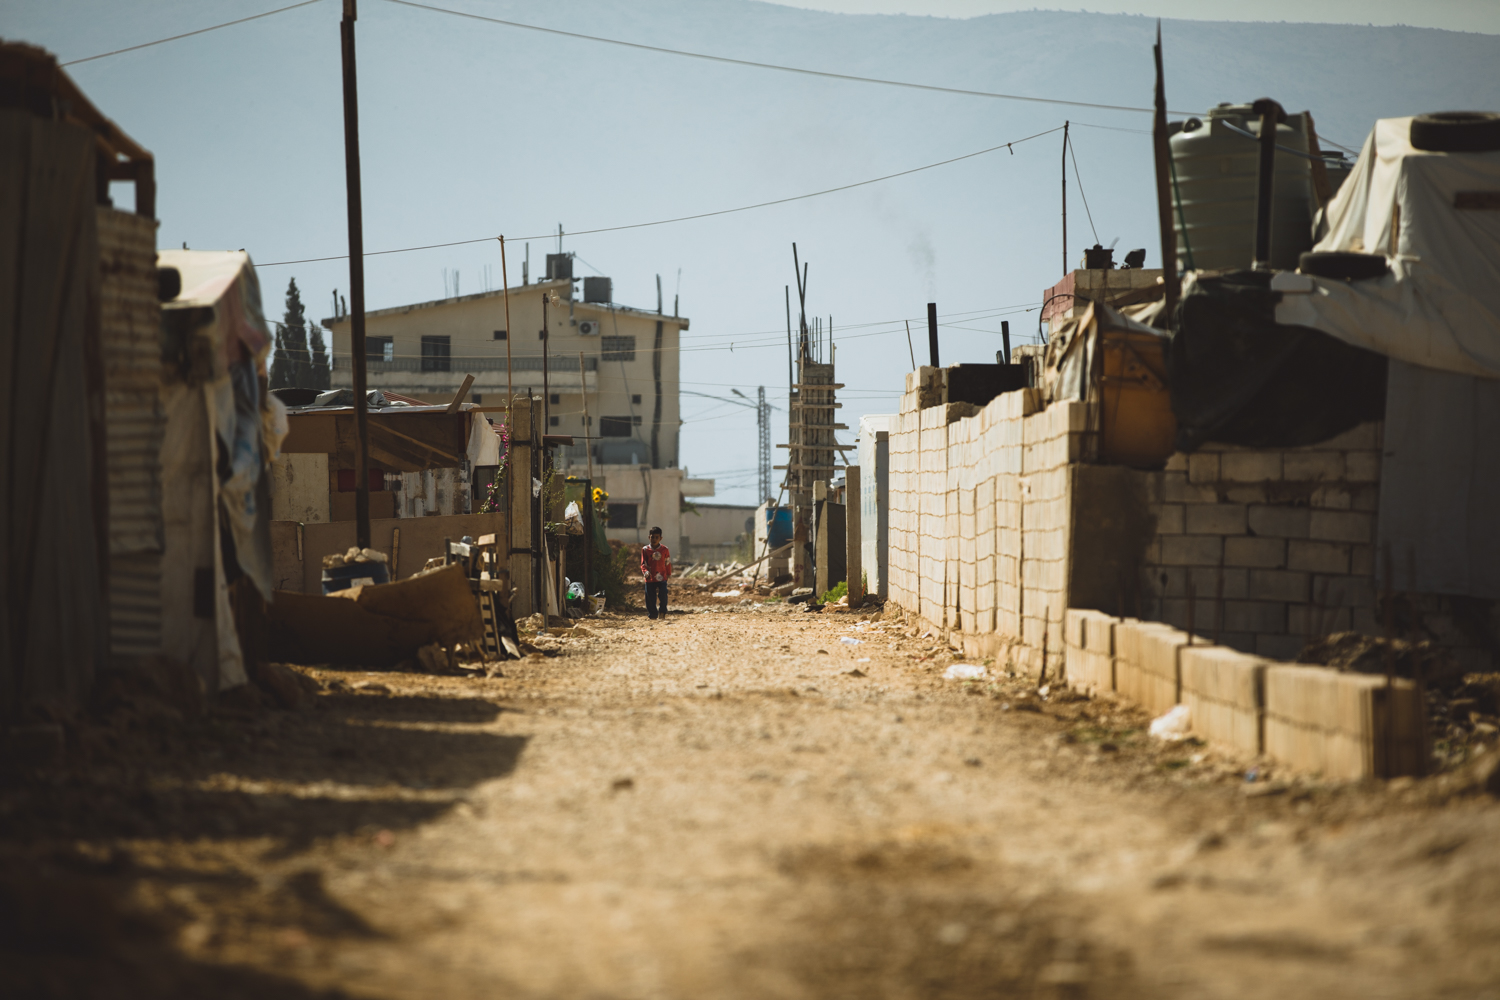  Unnamed refugee camp, Bekaa Valley. 